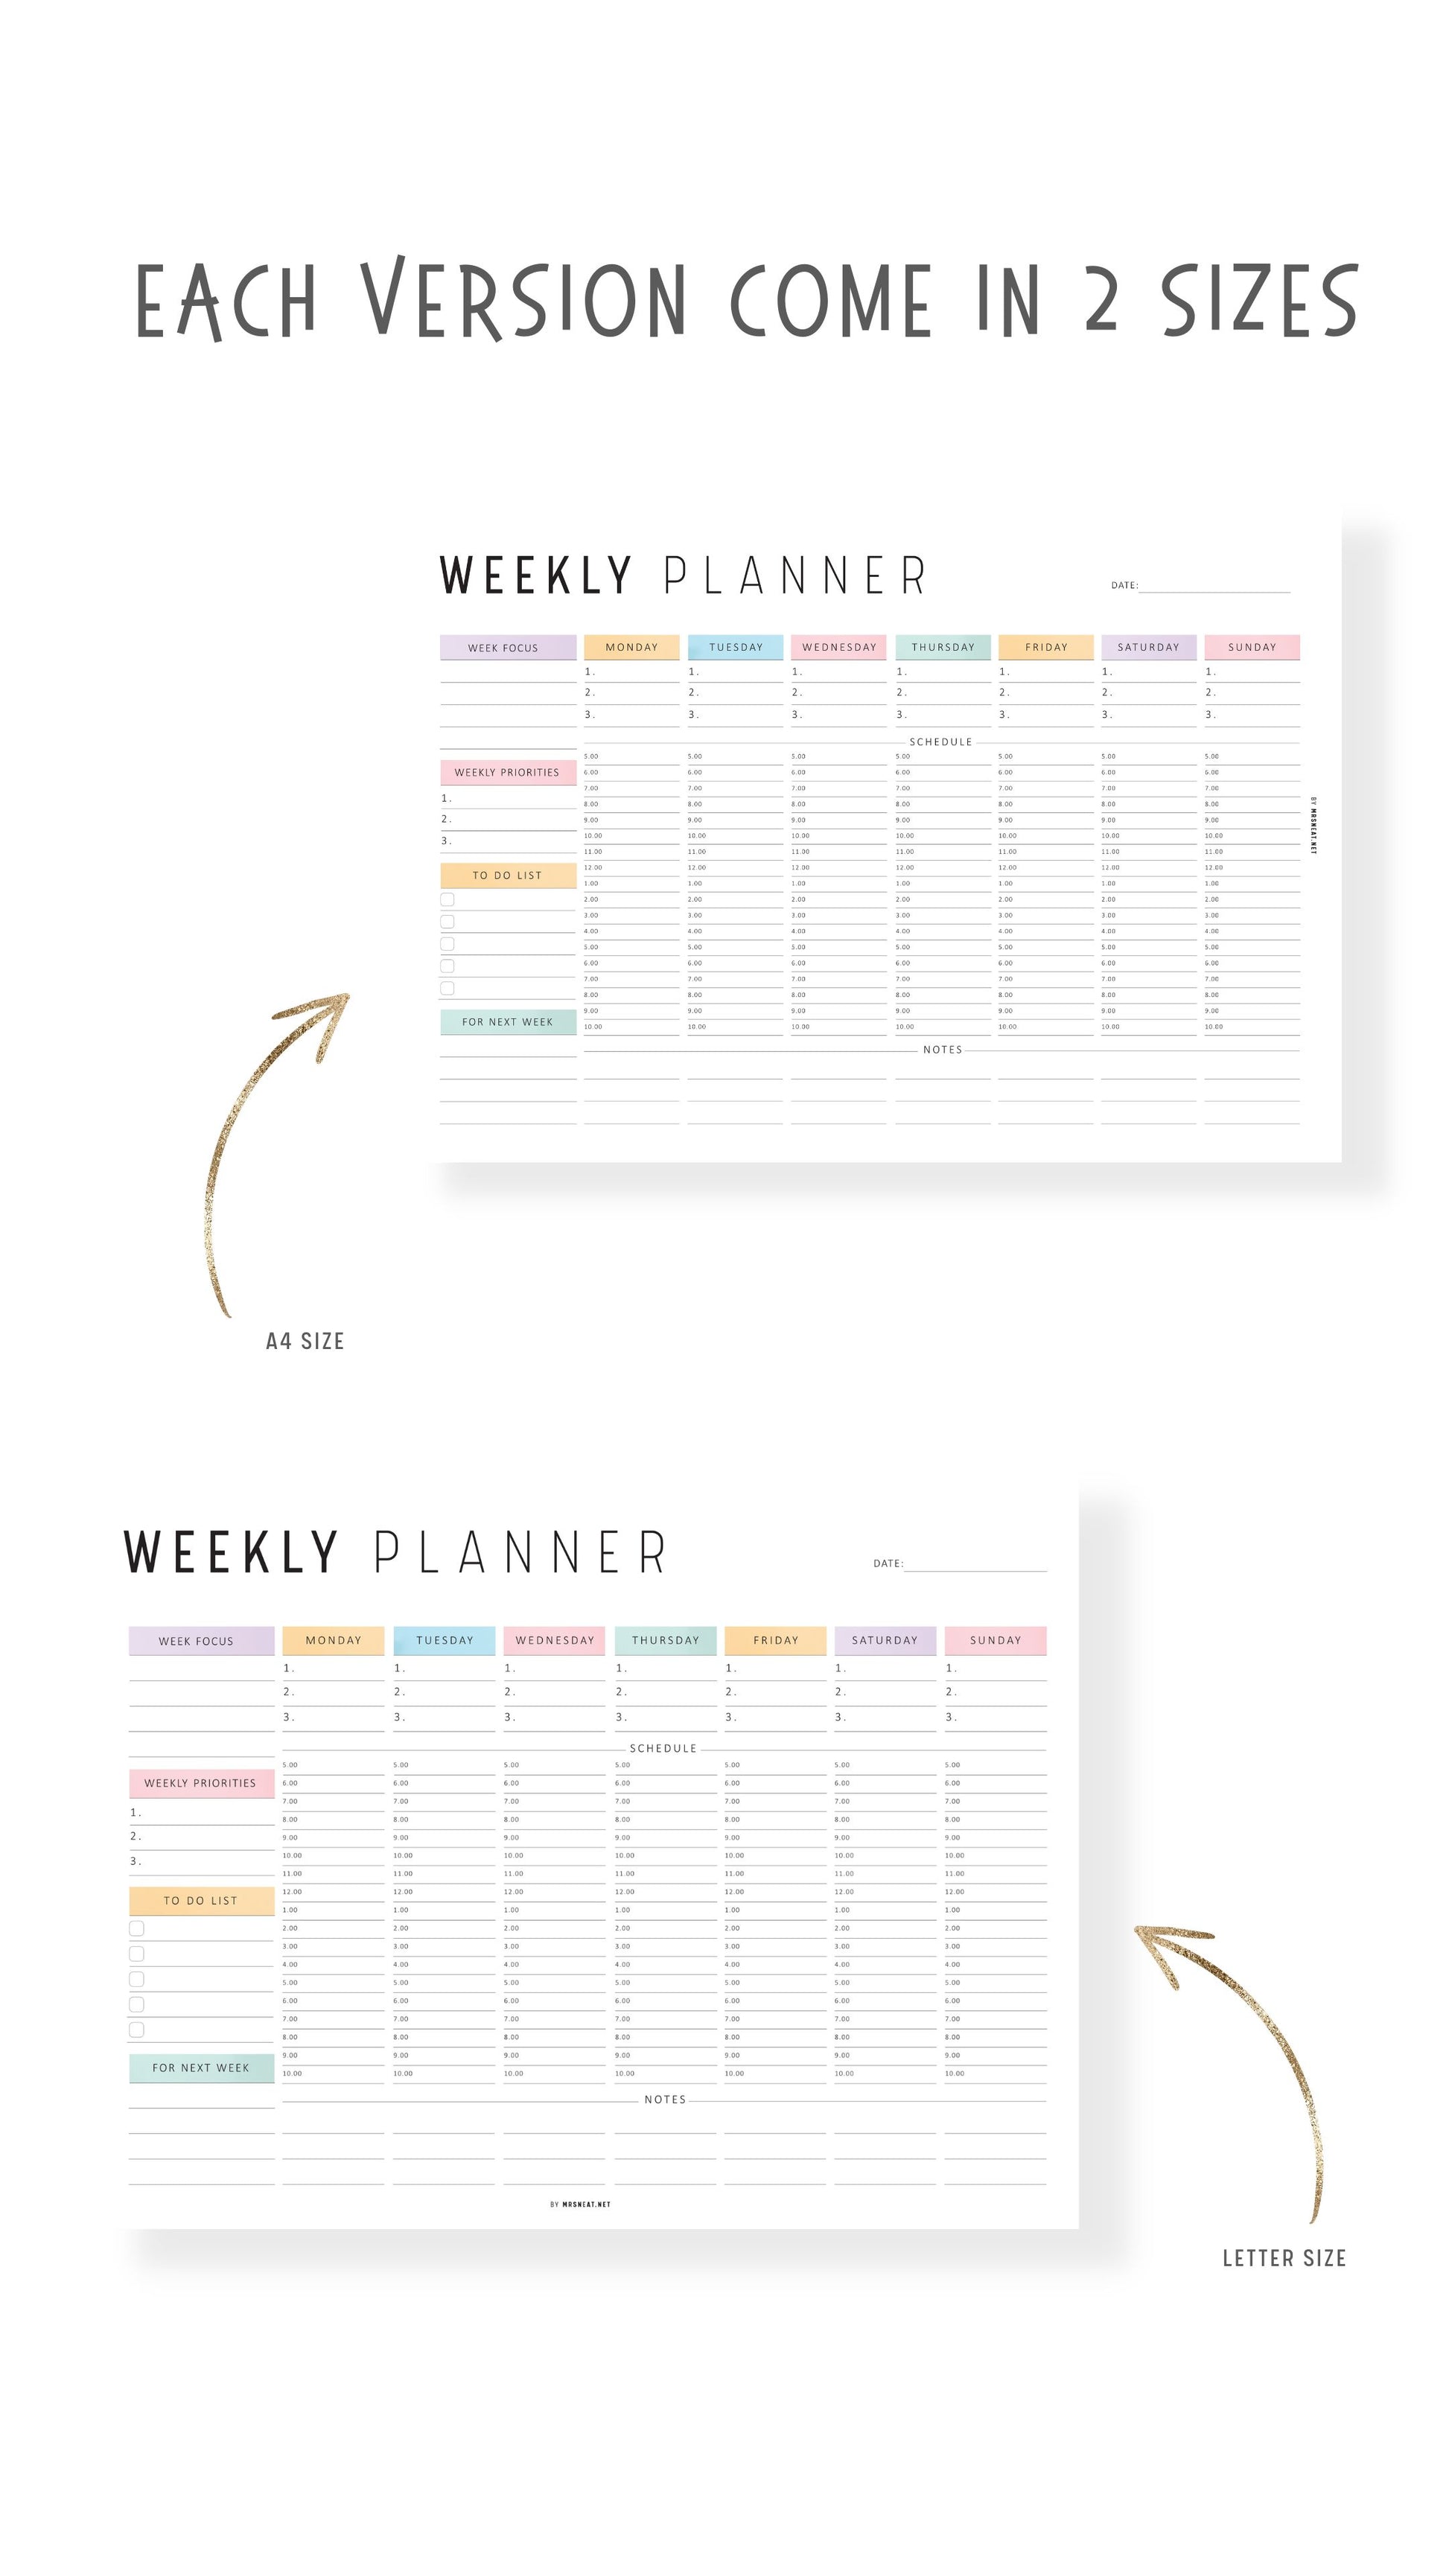 Colorful Weekly Hourly Planner Template Printable, Minimalist Option, A4, Letter, Sunday and Monday start options included, Landscape Template, Digital Planner